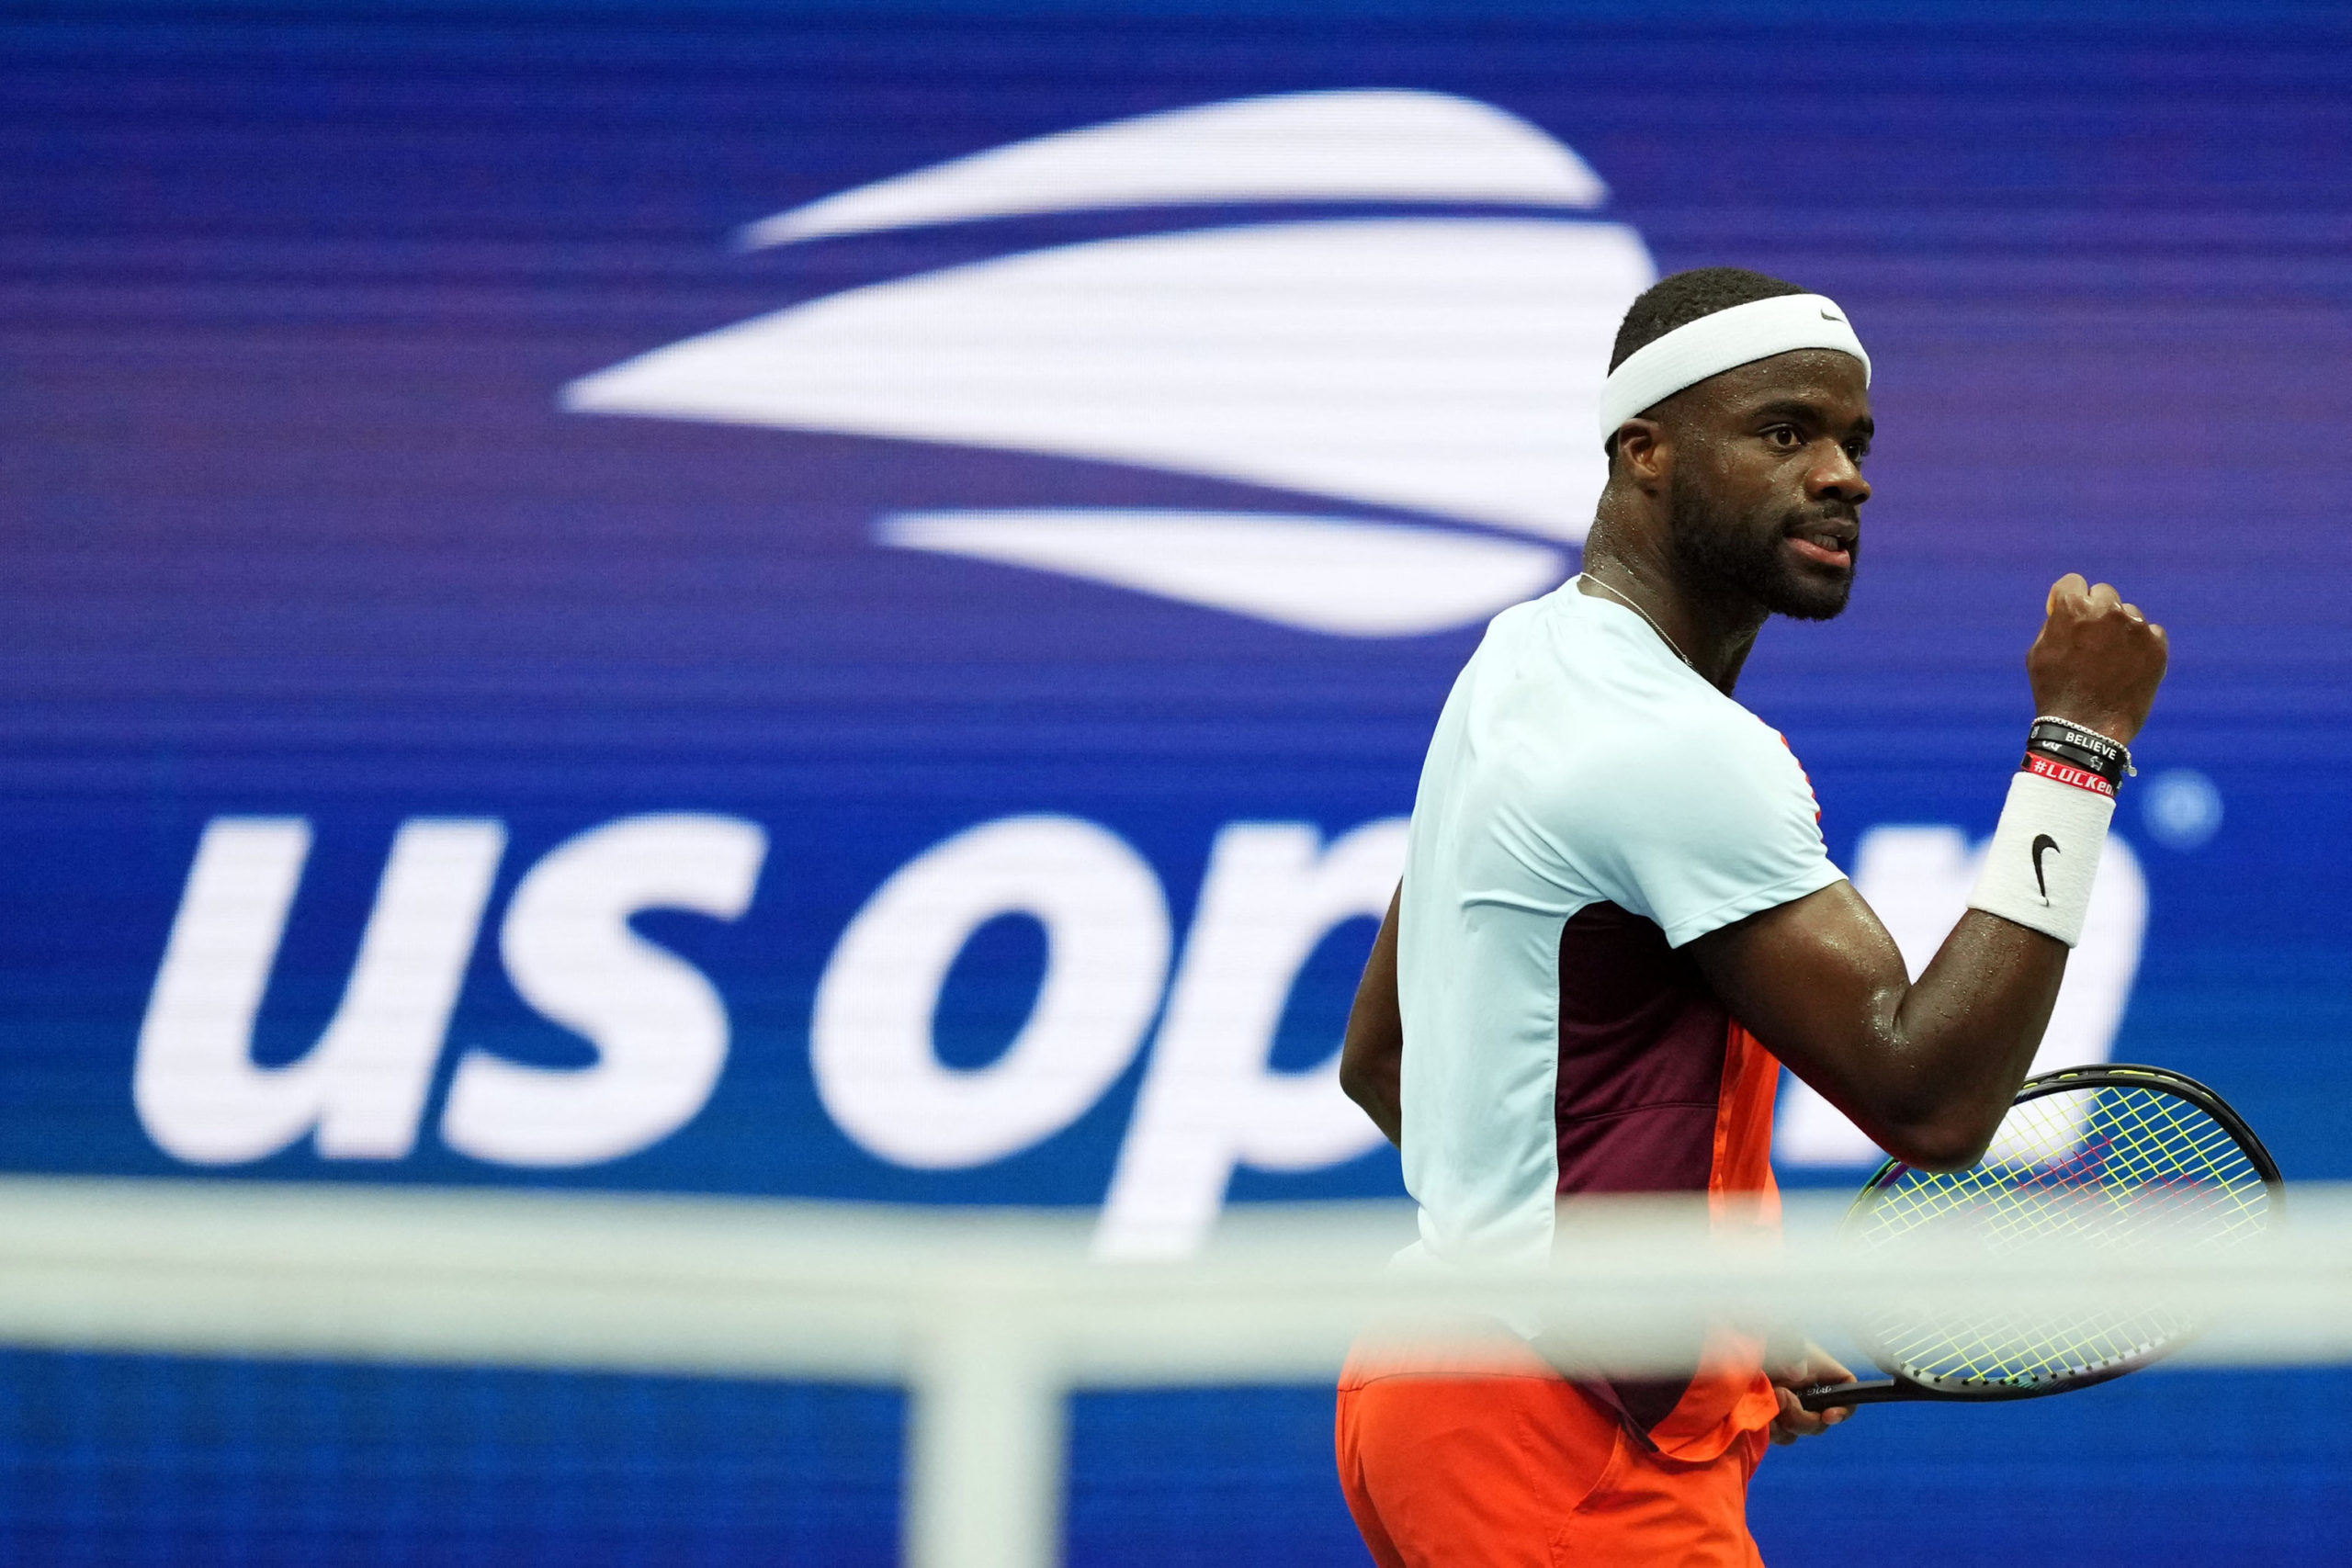 Frances Tiafoe of the United States reacts during a quarterfinal match against Andrey Rublev on day ten of the 2022 U.S. Open tennis tournament at USTA Billie Jean King Tennis Center. 